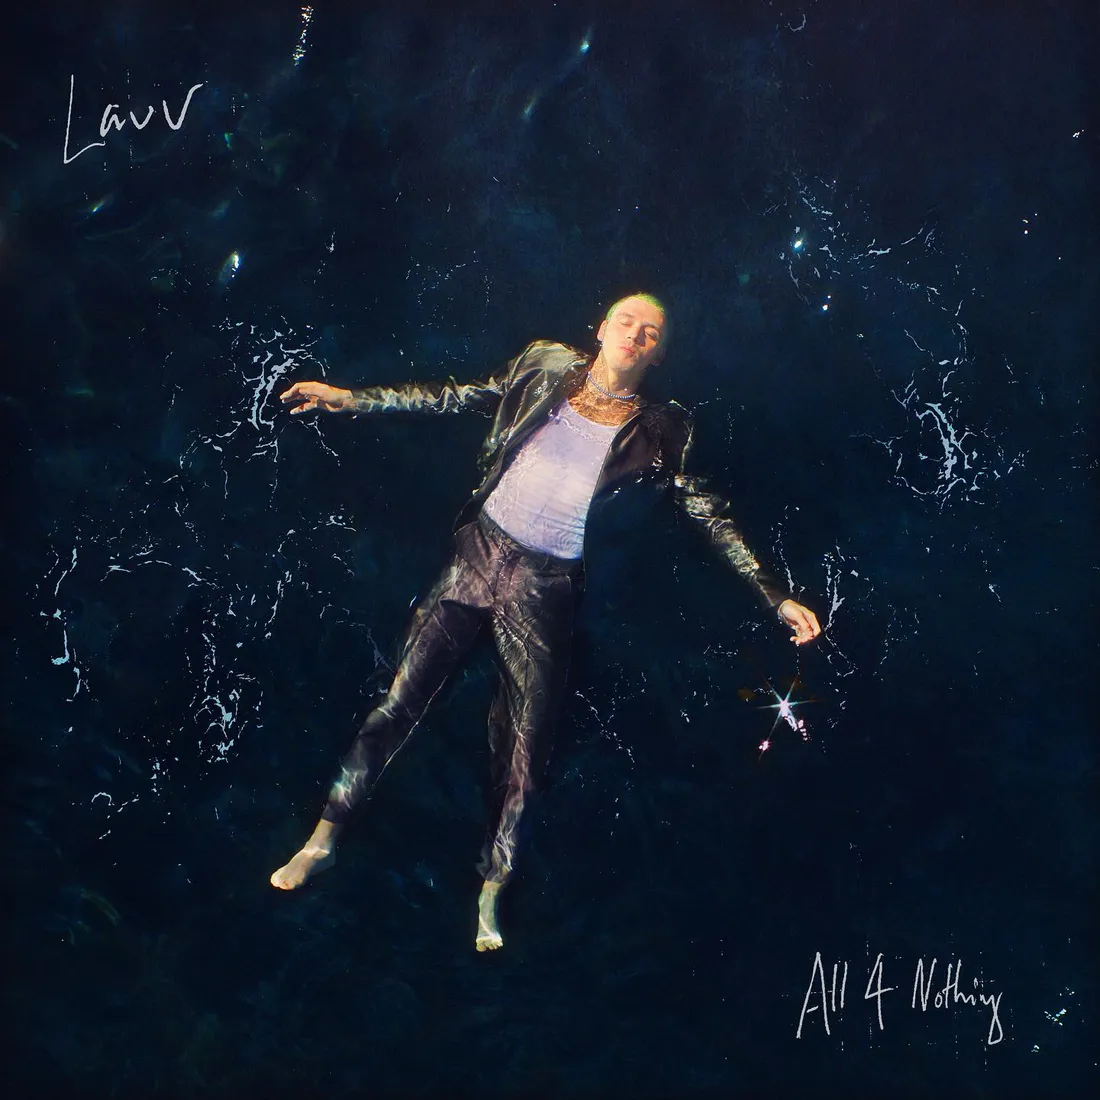 Lauv - All 4 nothing